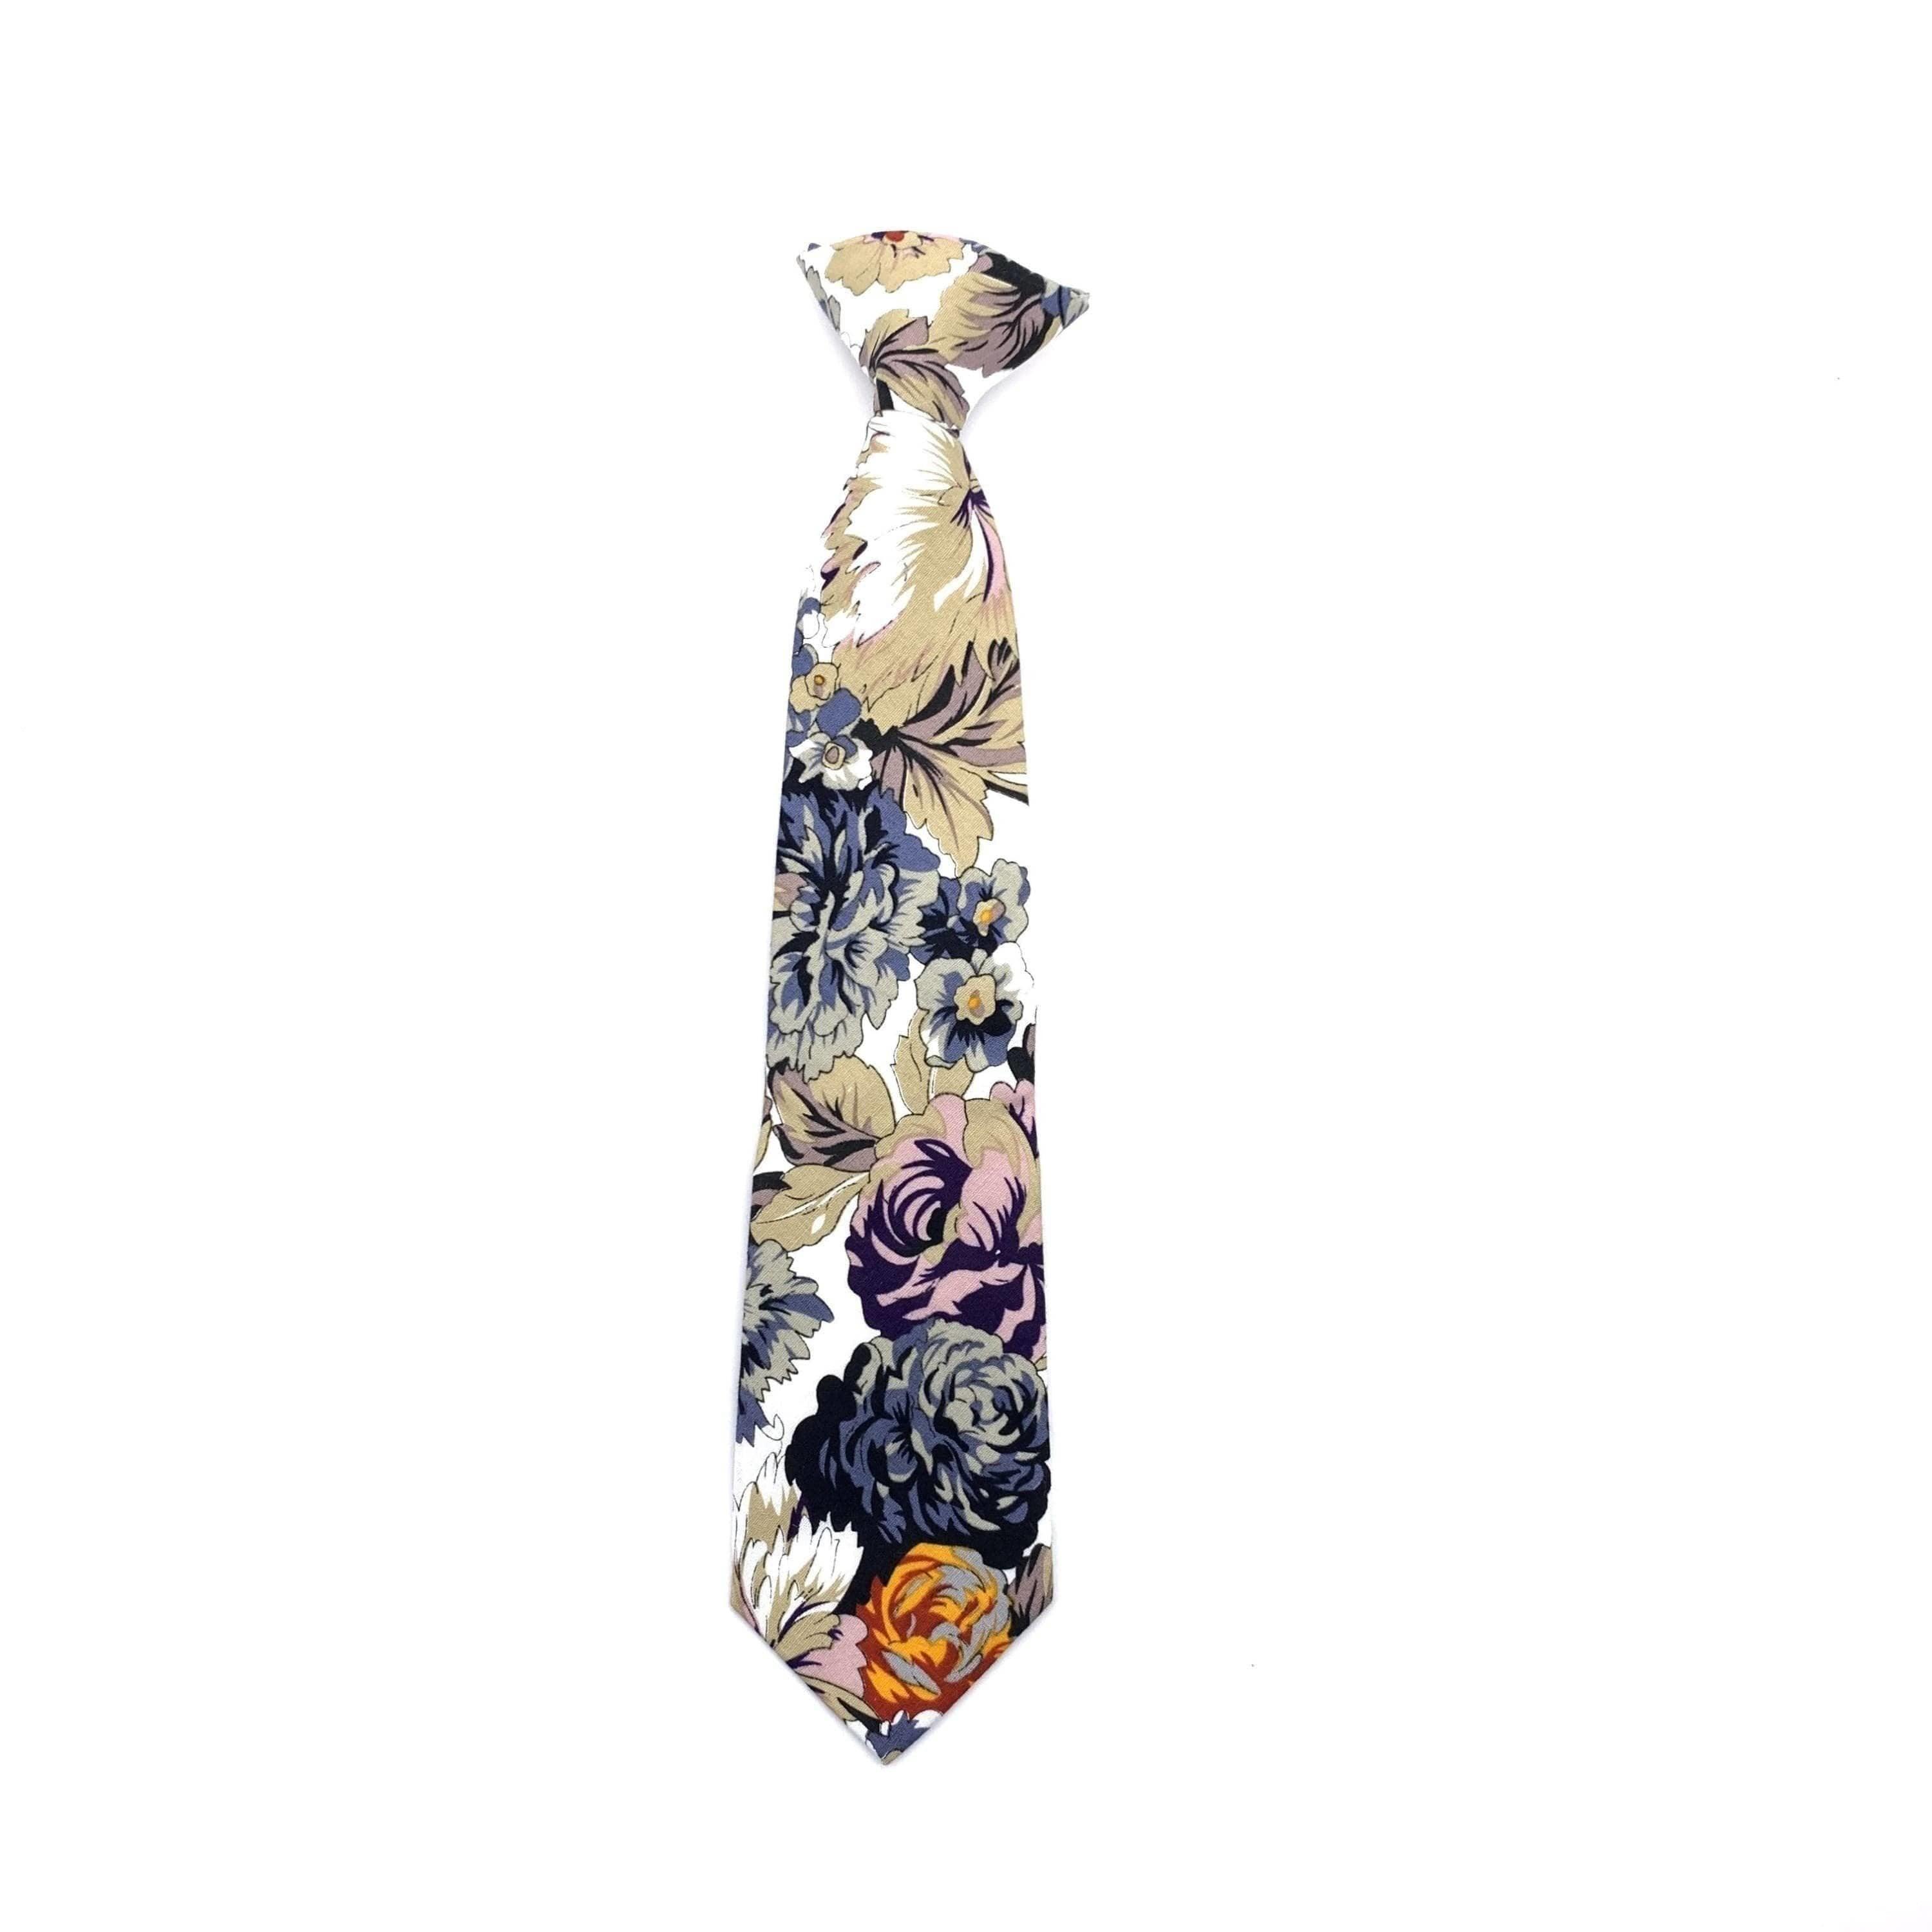 White Floral Clip On Tie for Kids DUKE-White Floral Clip On Tie Your little man will look so sharp in this dapper white floral clip on tie. This pre-tied tie is perfect for toddlers, kids and boys, and is adjustable to fit neck sizes up to 13 inches.This darling tie is perfect for special occasions or everyday wear. The tie is sweet and stylish, and the clip on design makes it easy to put on and take off. Make dressing up a breeze with this easy to wear clip on tie. Your little man will love fee